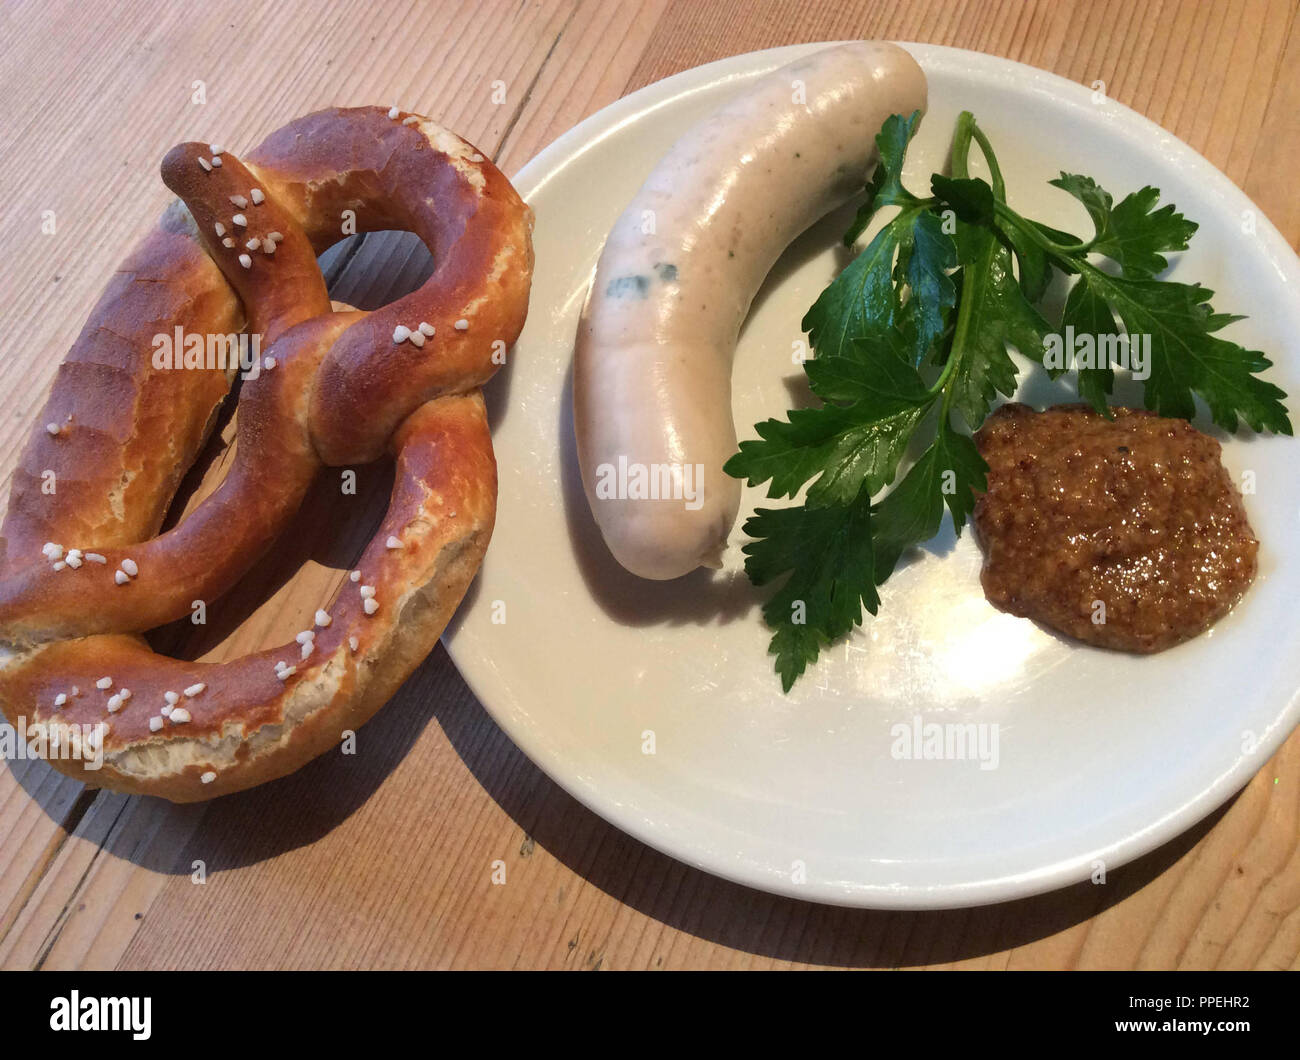 Weisswurst snack or breakfast with pretzel, parsley and mustard on a rustic wooden table. Stock Photo